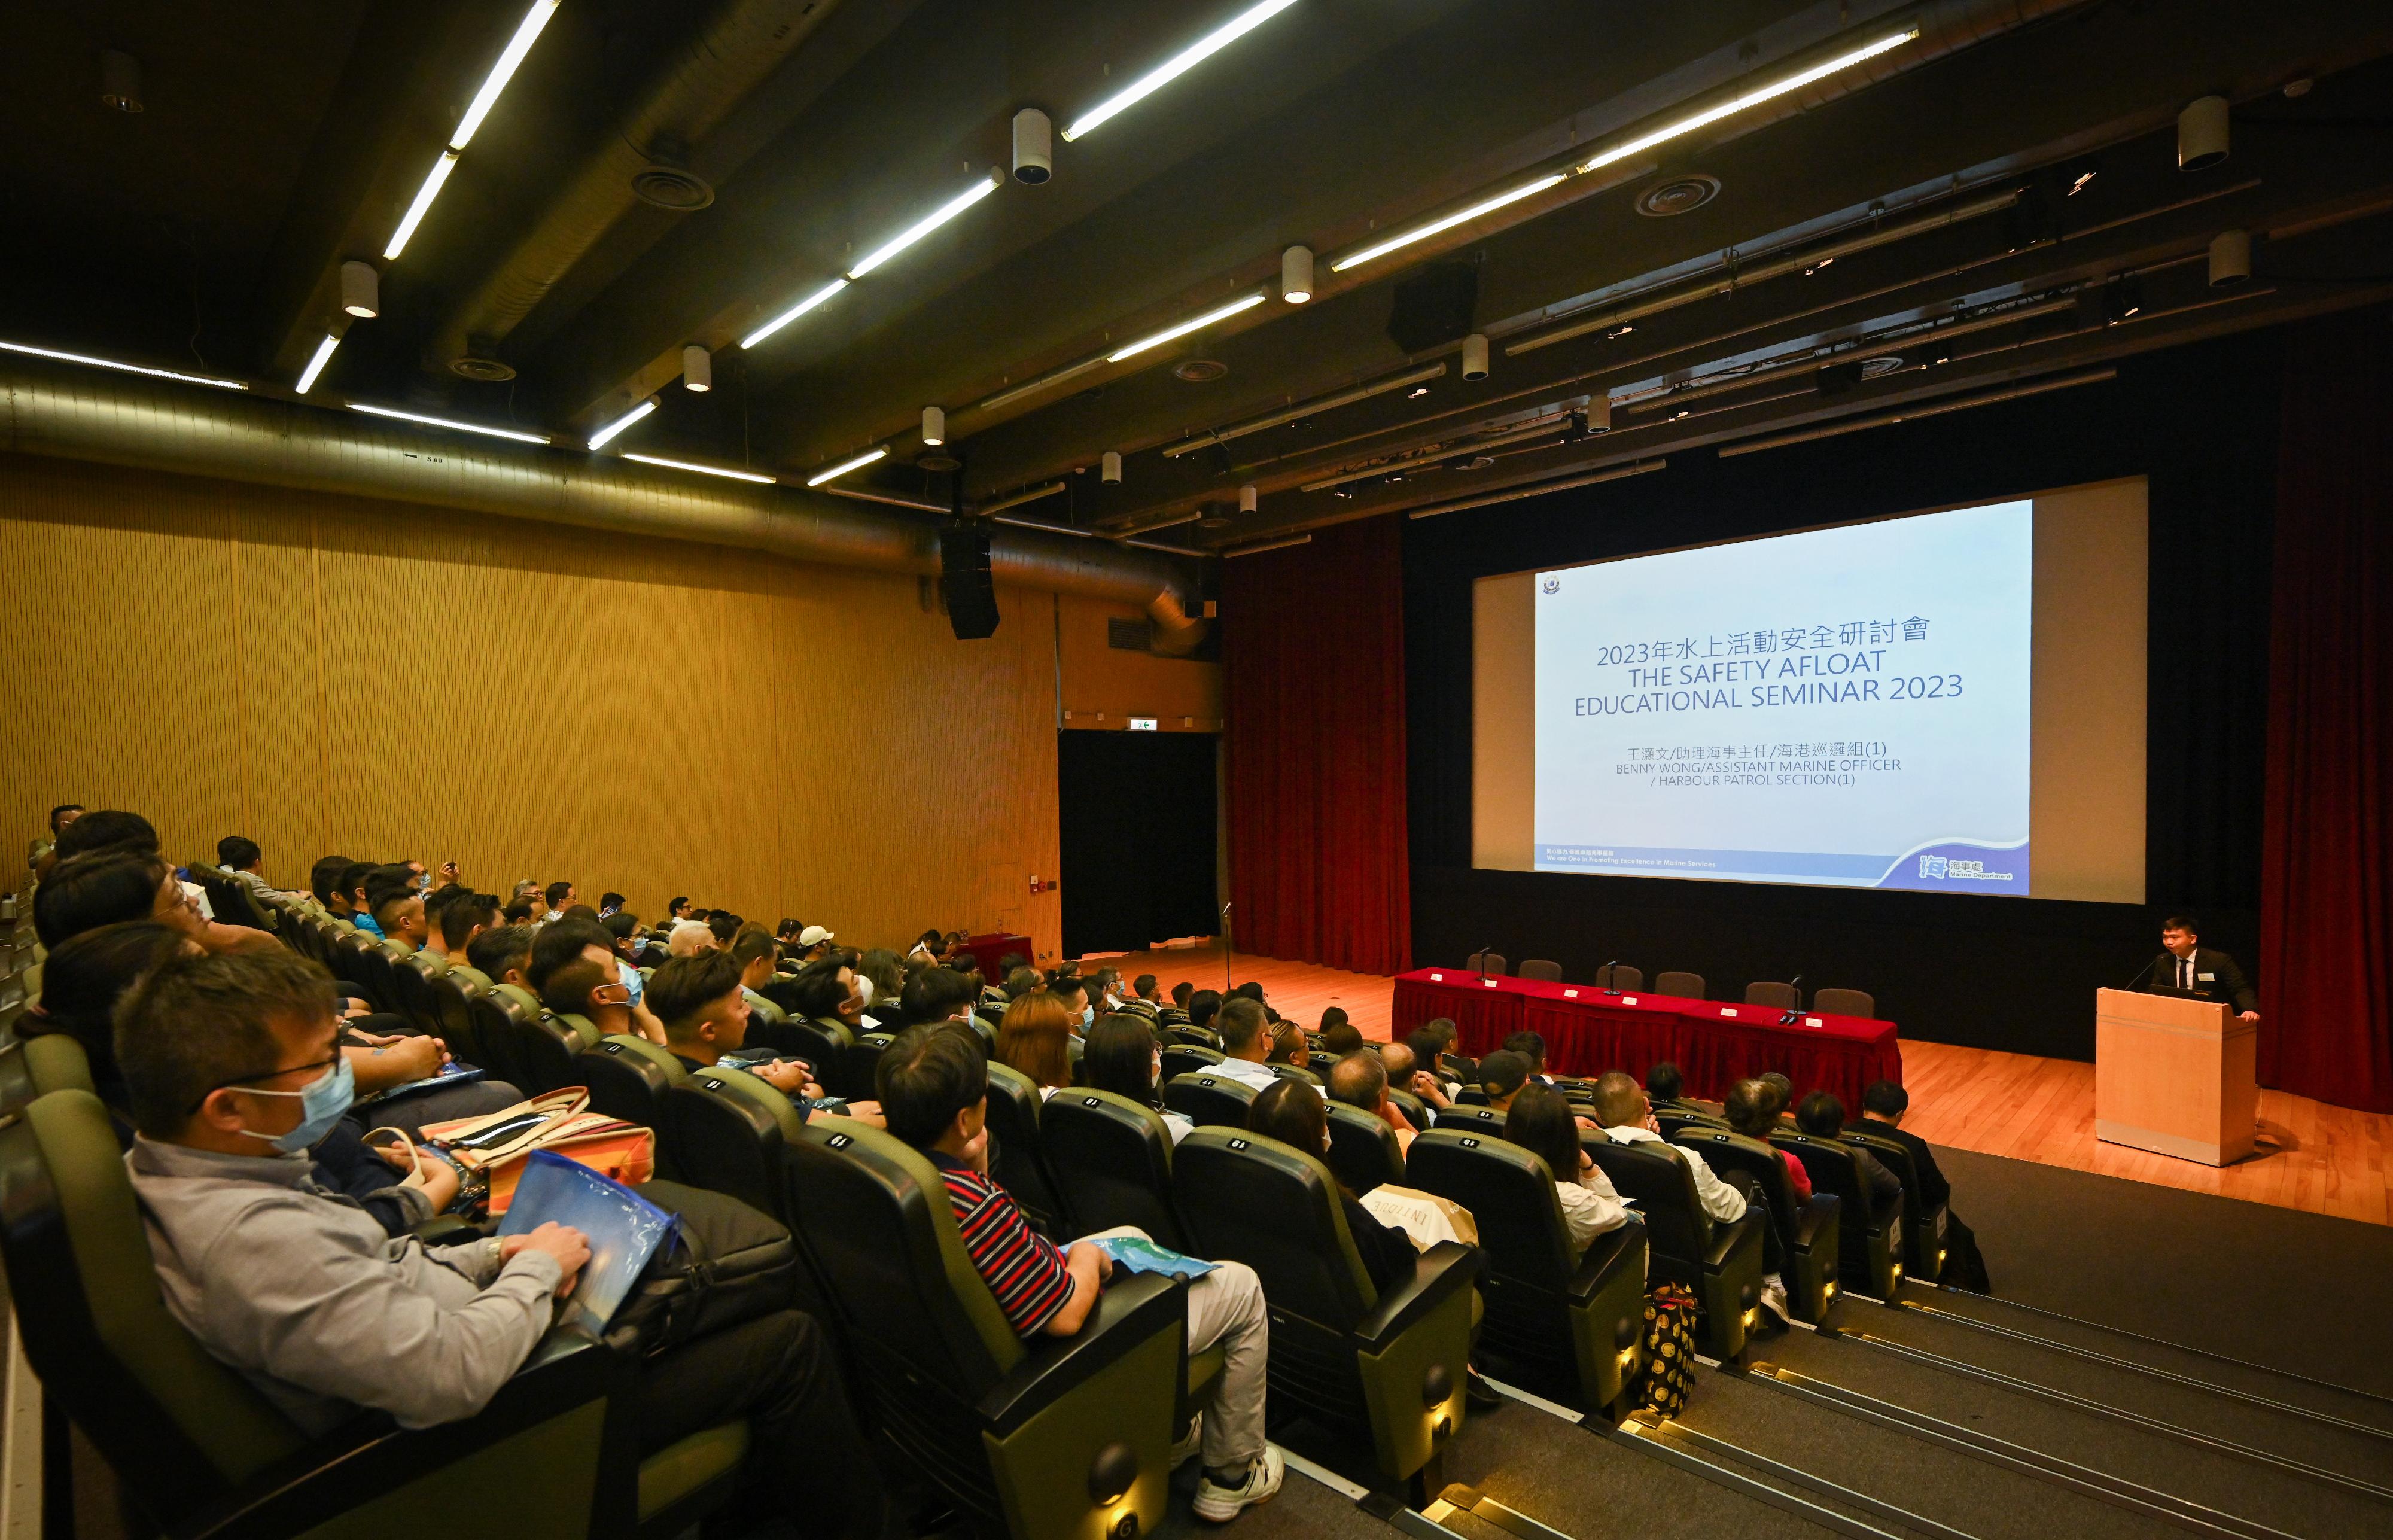 About 140 representatives from the shipping and water sport sectors as well as coxswains and vessel operators attend the 2023 Safety Afloat Educational Seminar at the Hong Kong Science Museum today (May 12).